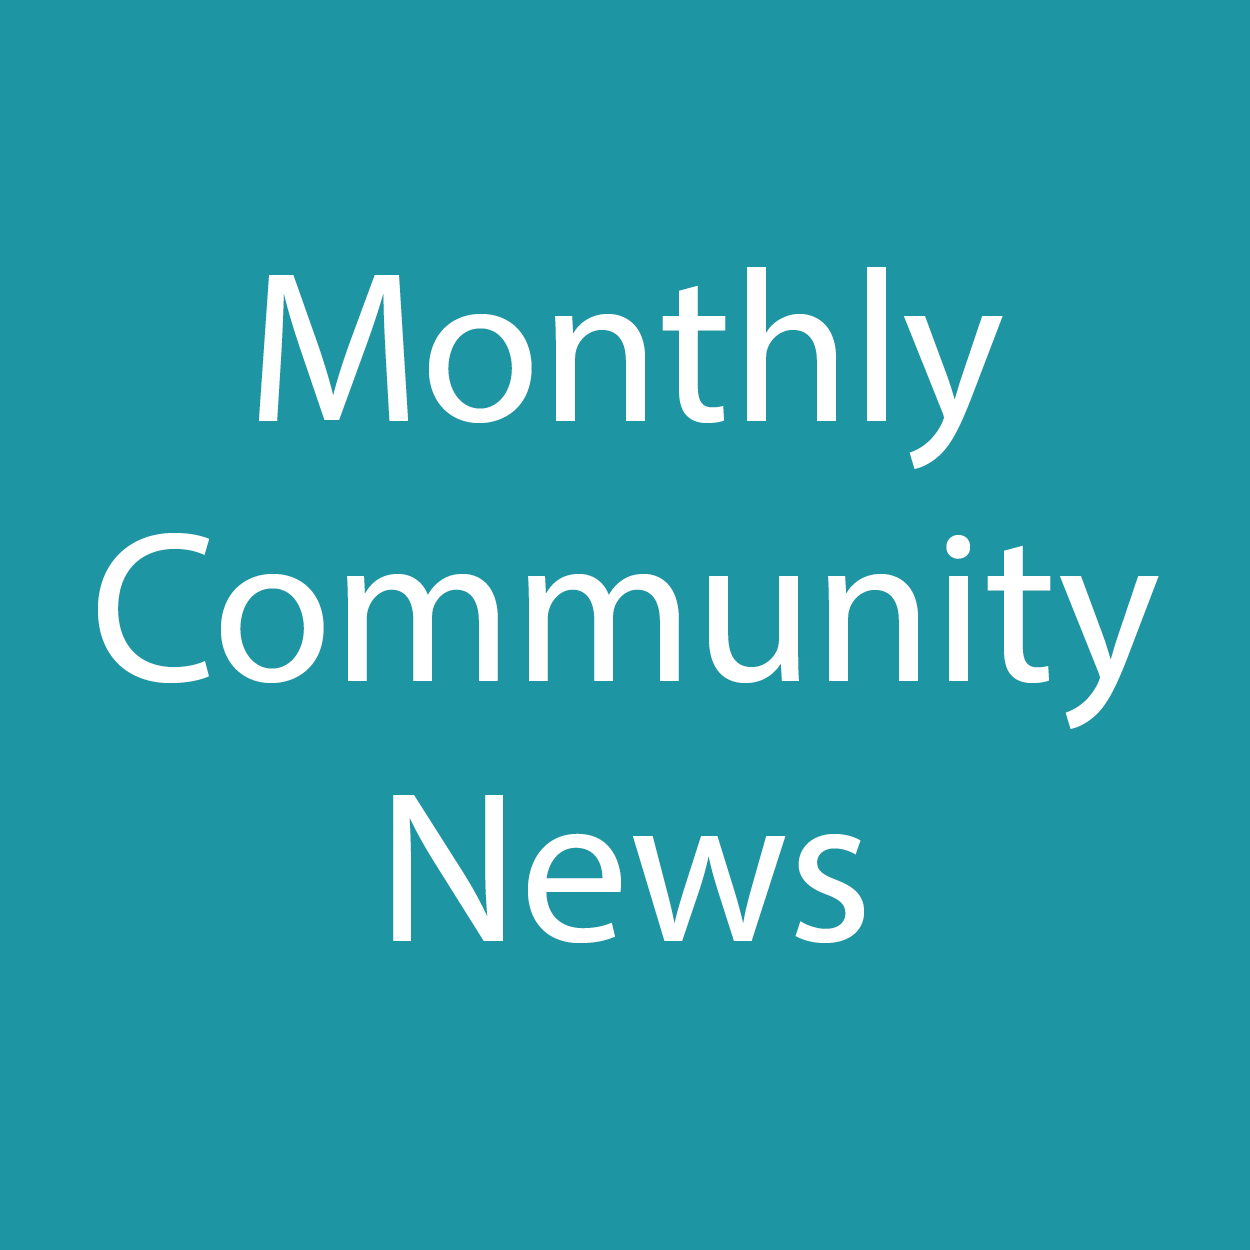 Community News from New Ways Ministry